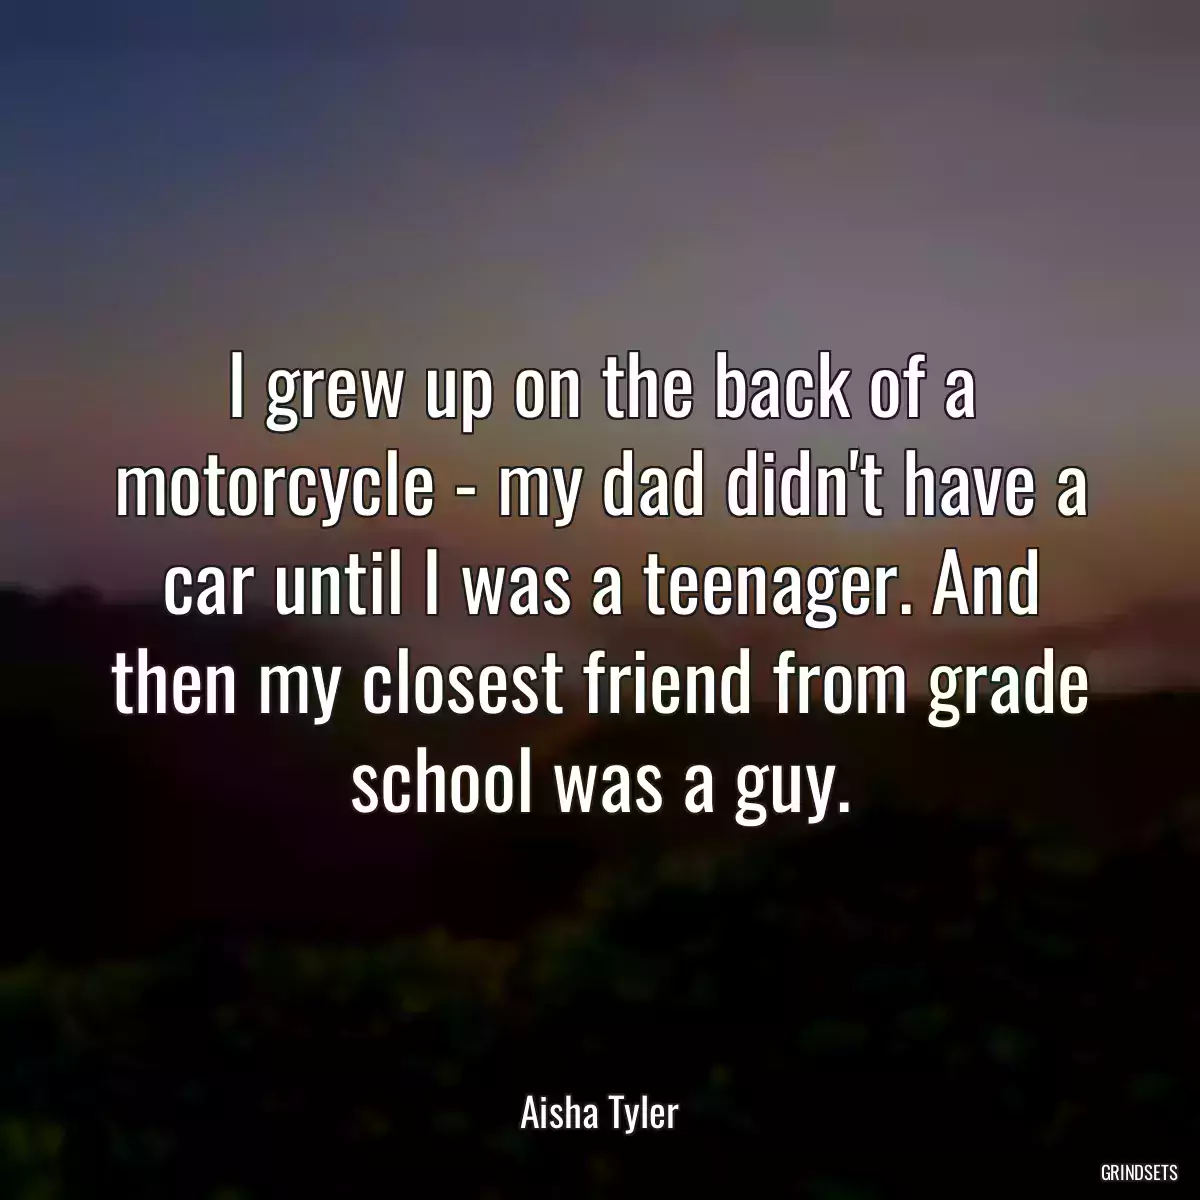 I grew up on the back of a motorcycle - my dad didn\'t have a car until I was a teenager. And then my closest friend from grade school was a guy.